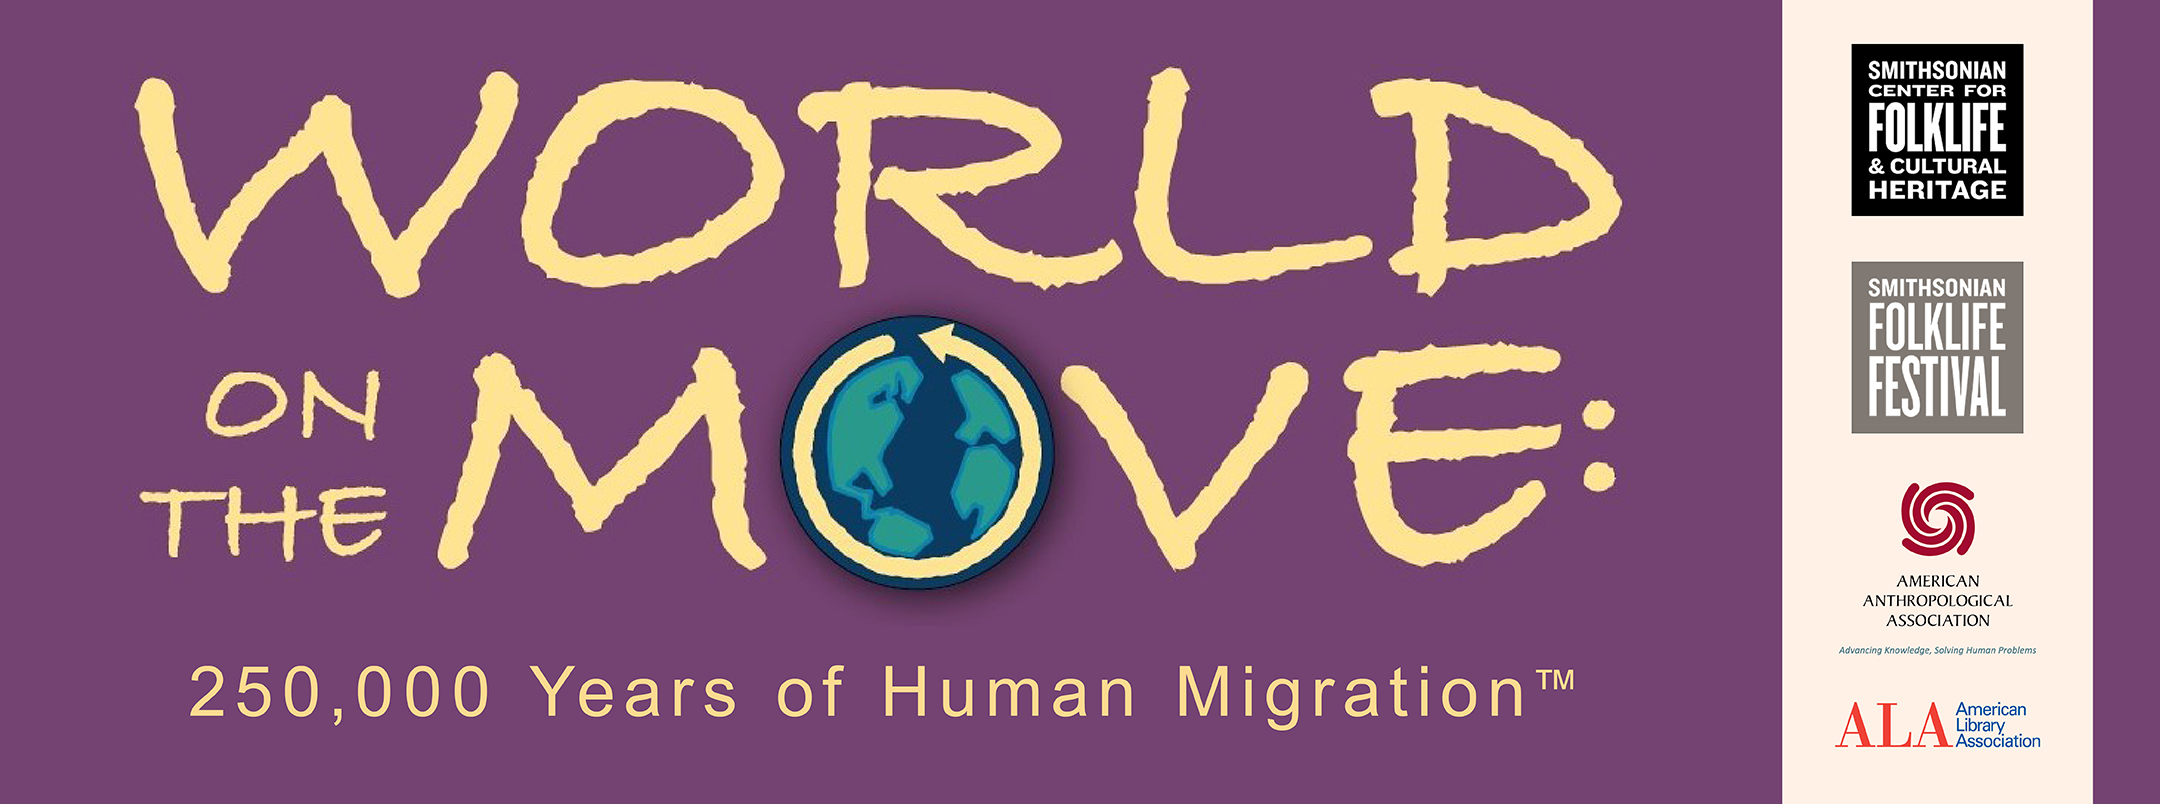 Yellow text on purple background reads: World on the Move 250,000 Years of Human Migration. Smithsonian logo. AAA logo. ALA logo.